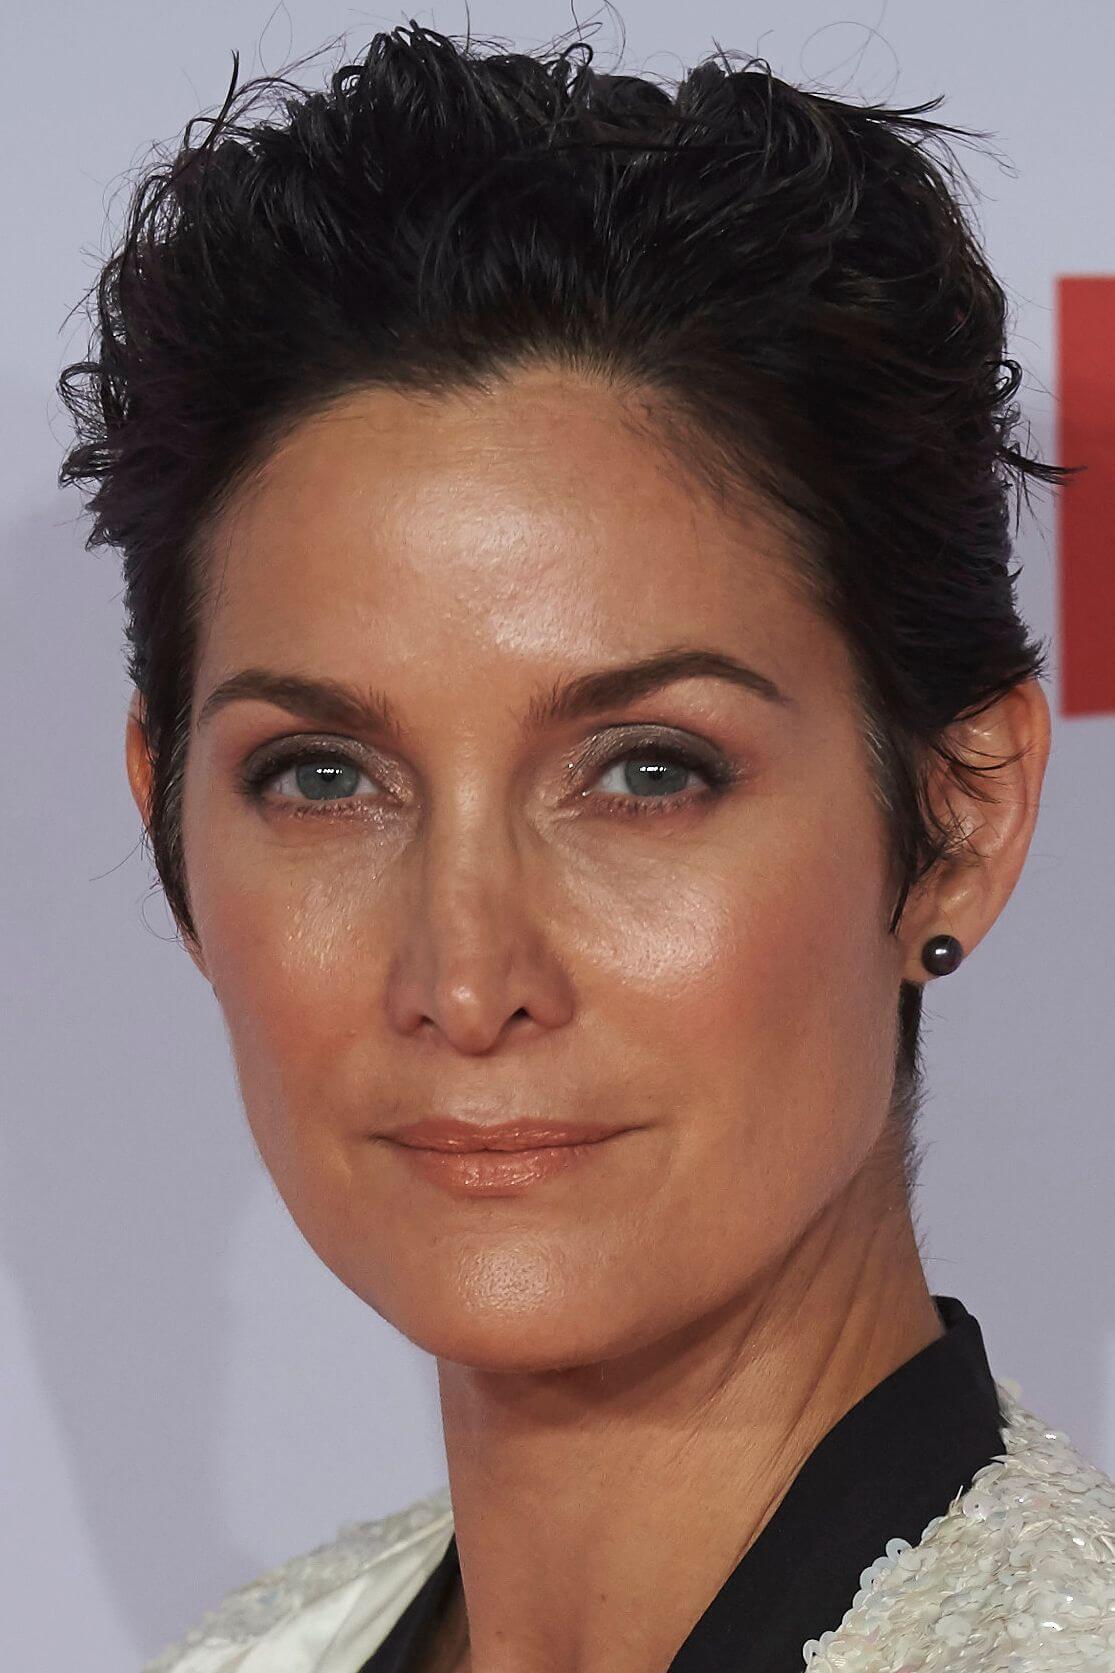 60+ Hottest Carrie-Anne Moss Boobs Pictures Will Make You Fall In Love Like Crazy 41